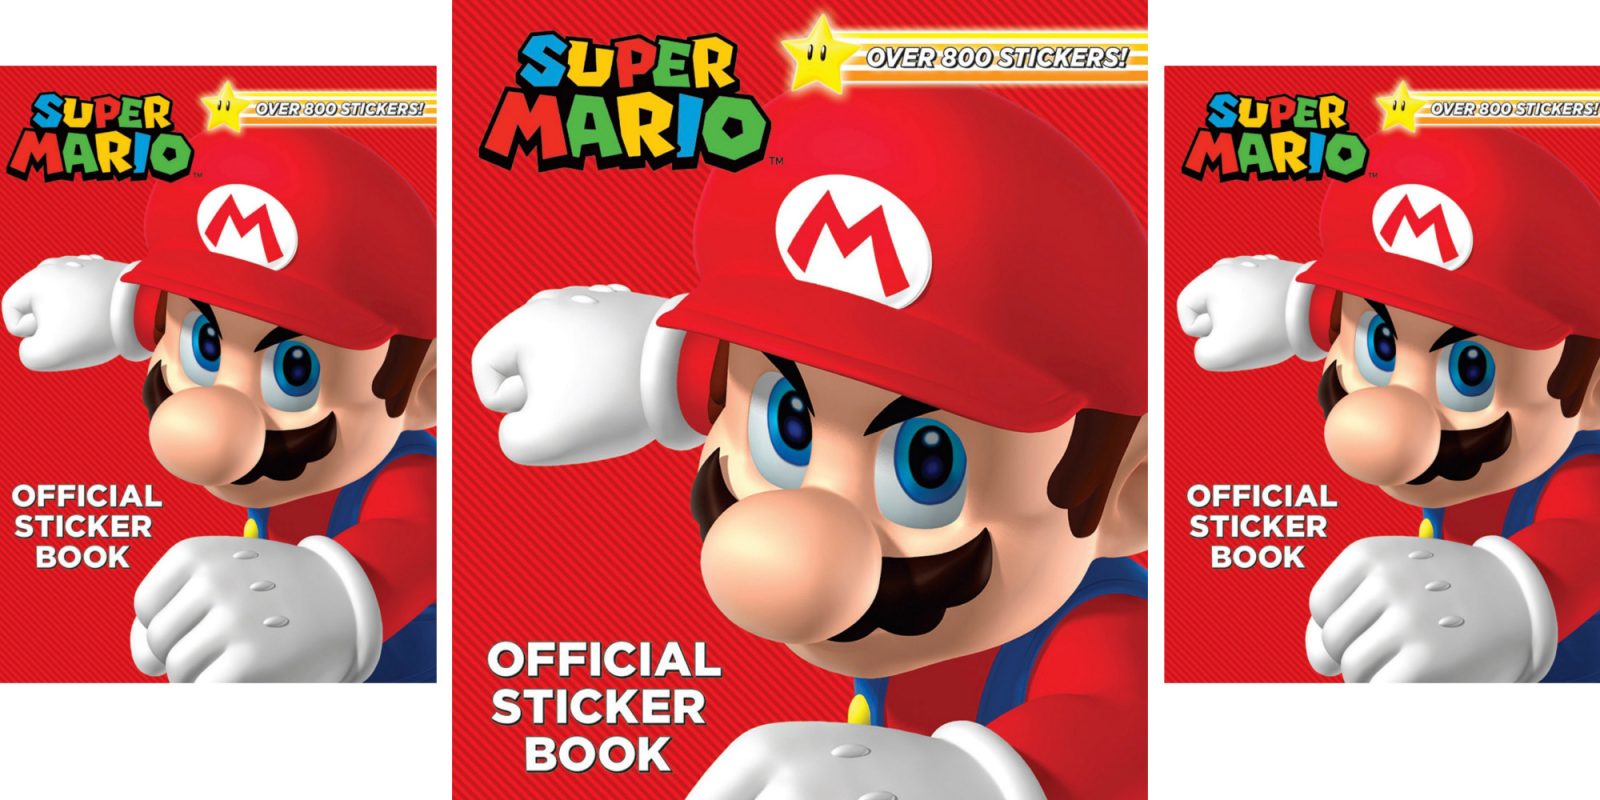 super-mario-official-activity-book-with-800-stickers-for-7-amazon